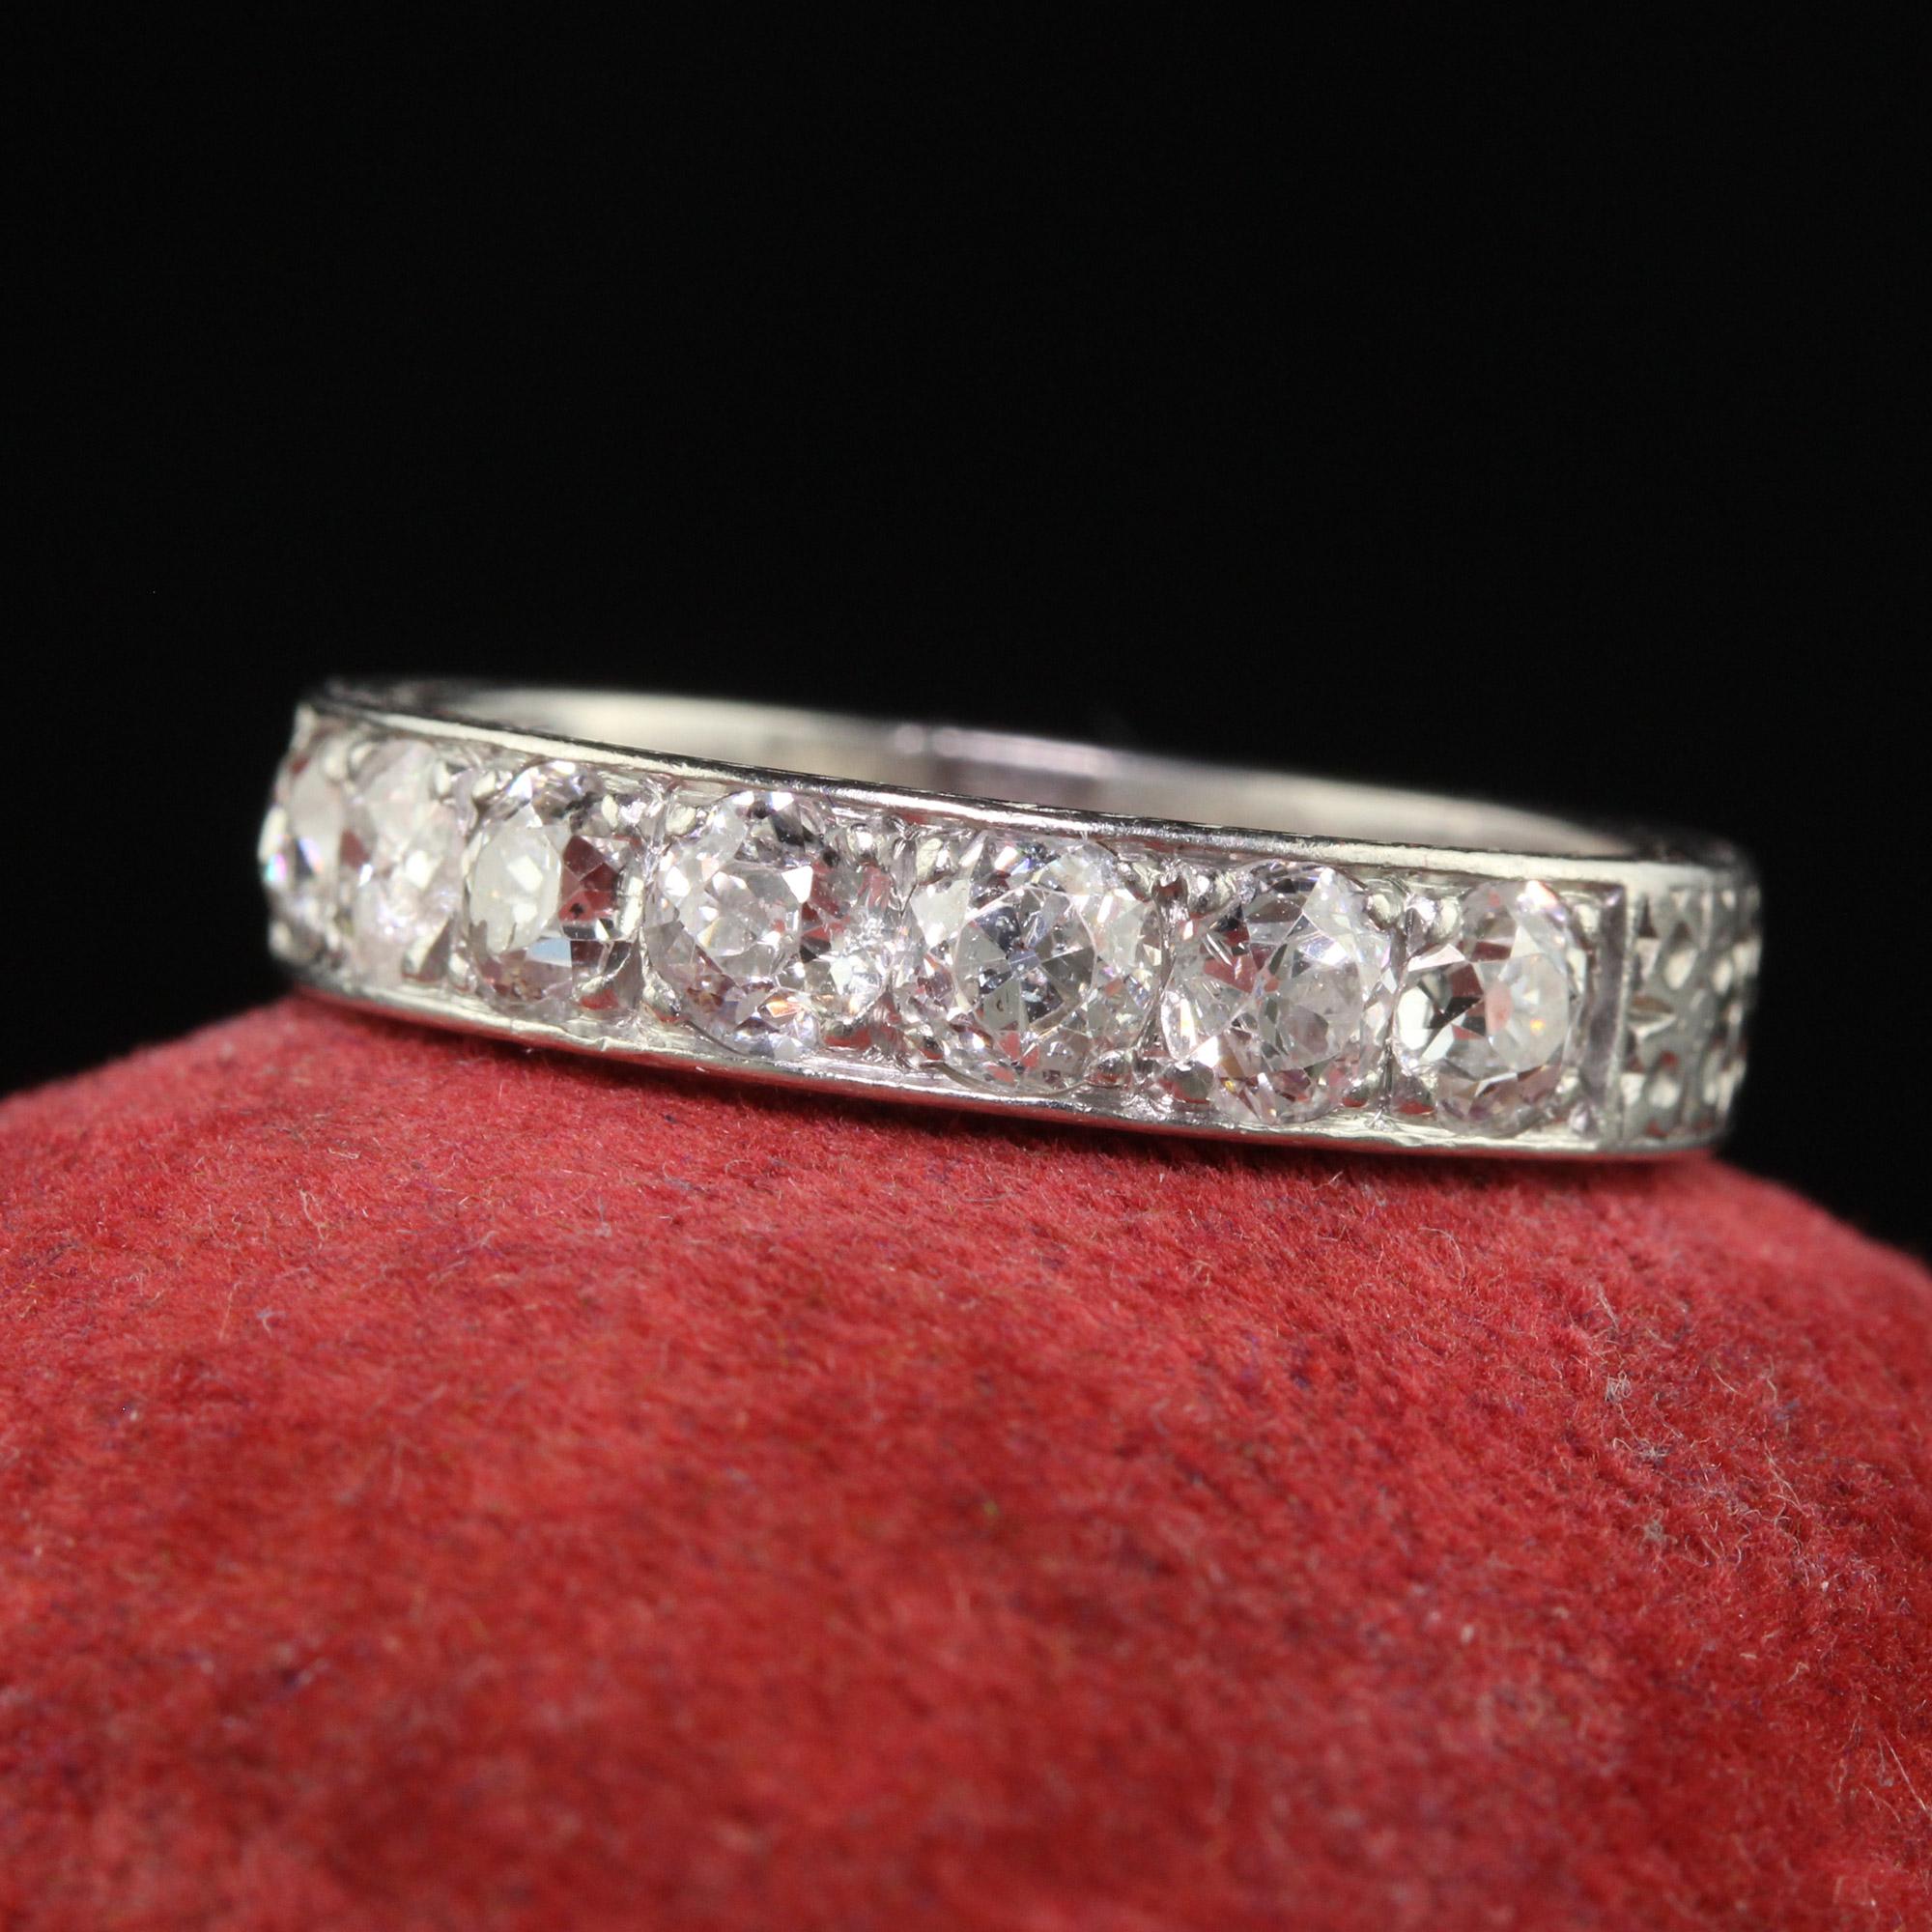 Beautiful Antique Art Deco Platinum Old European Cut Seven Diamond Engraved Band. This gorgeous wedding band is crafted in platinum. The top has seven chunky old European cut diamonds set in an engraved Art Deco band. The ring sits low on the finger